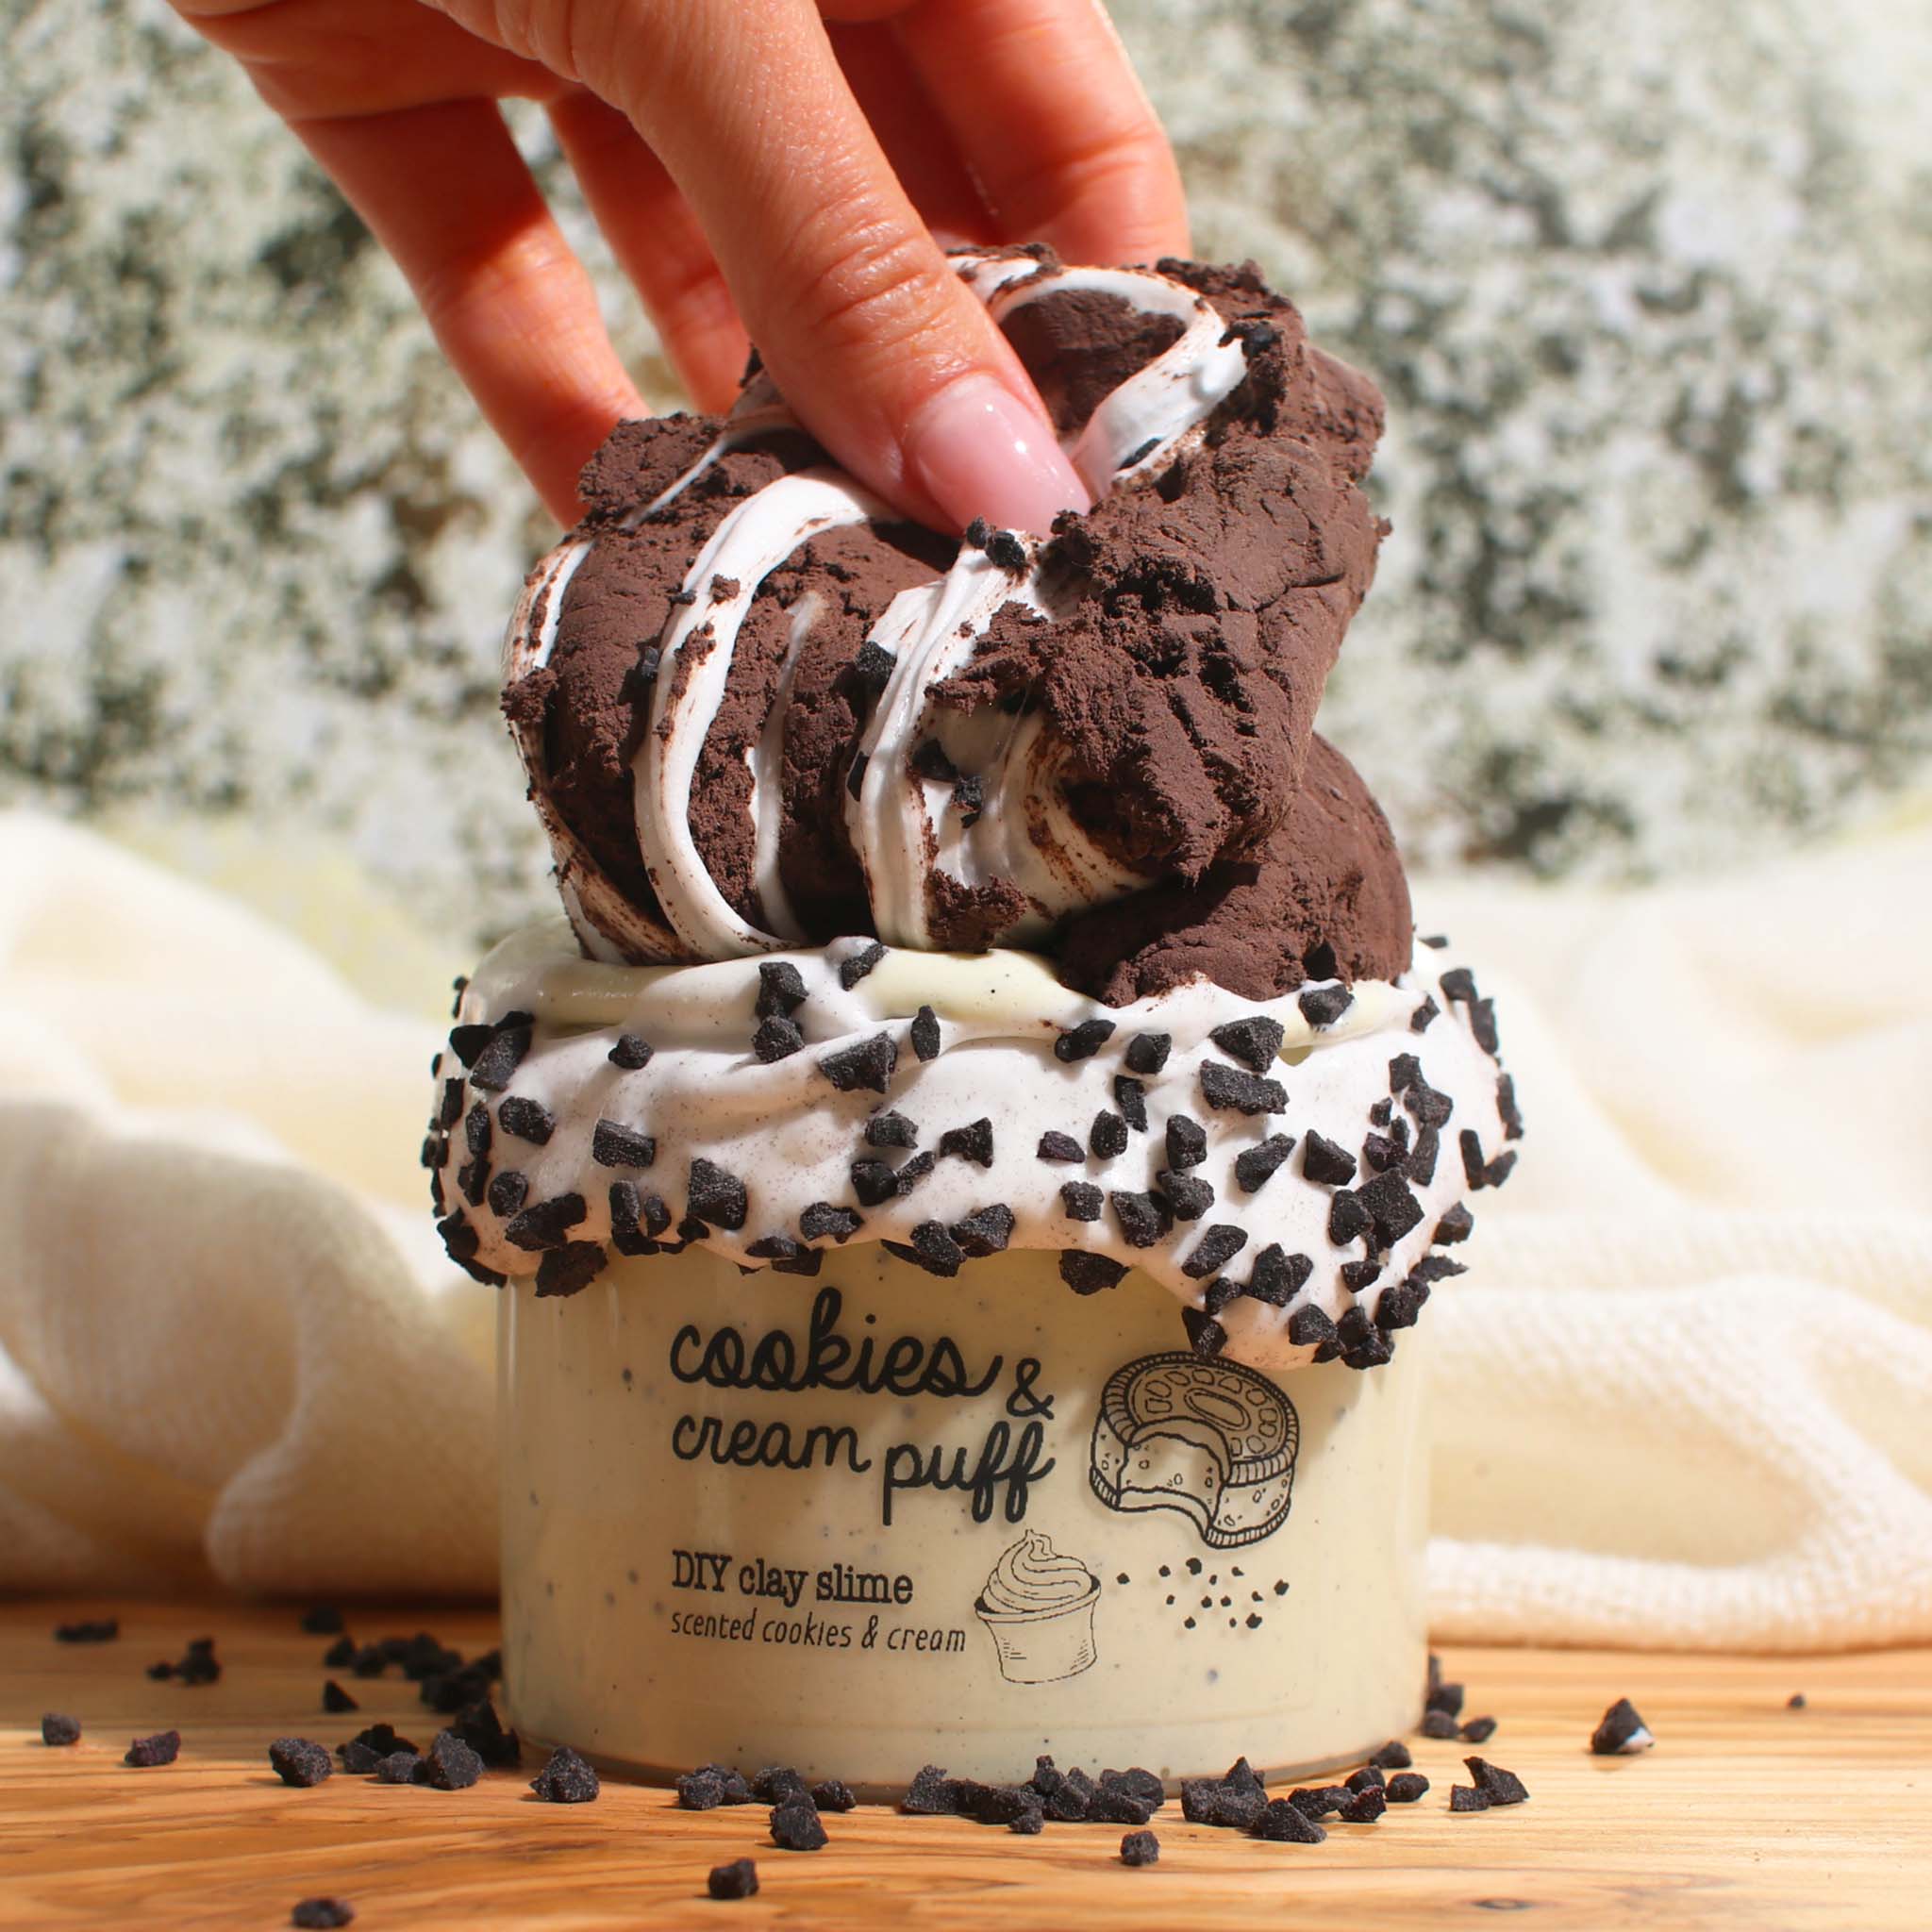 Cookies and Cream Puff Clay Butter Scented DIY Slime Fantasies Shop Topper